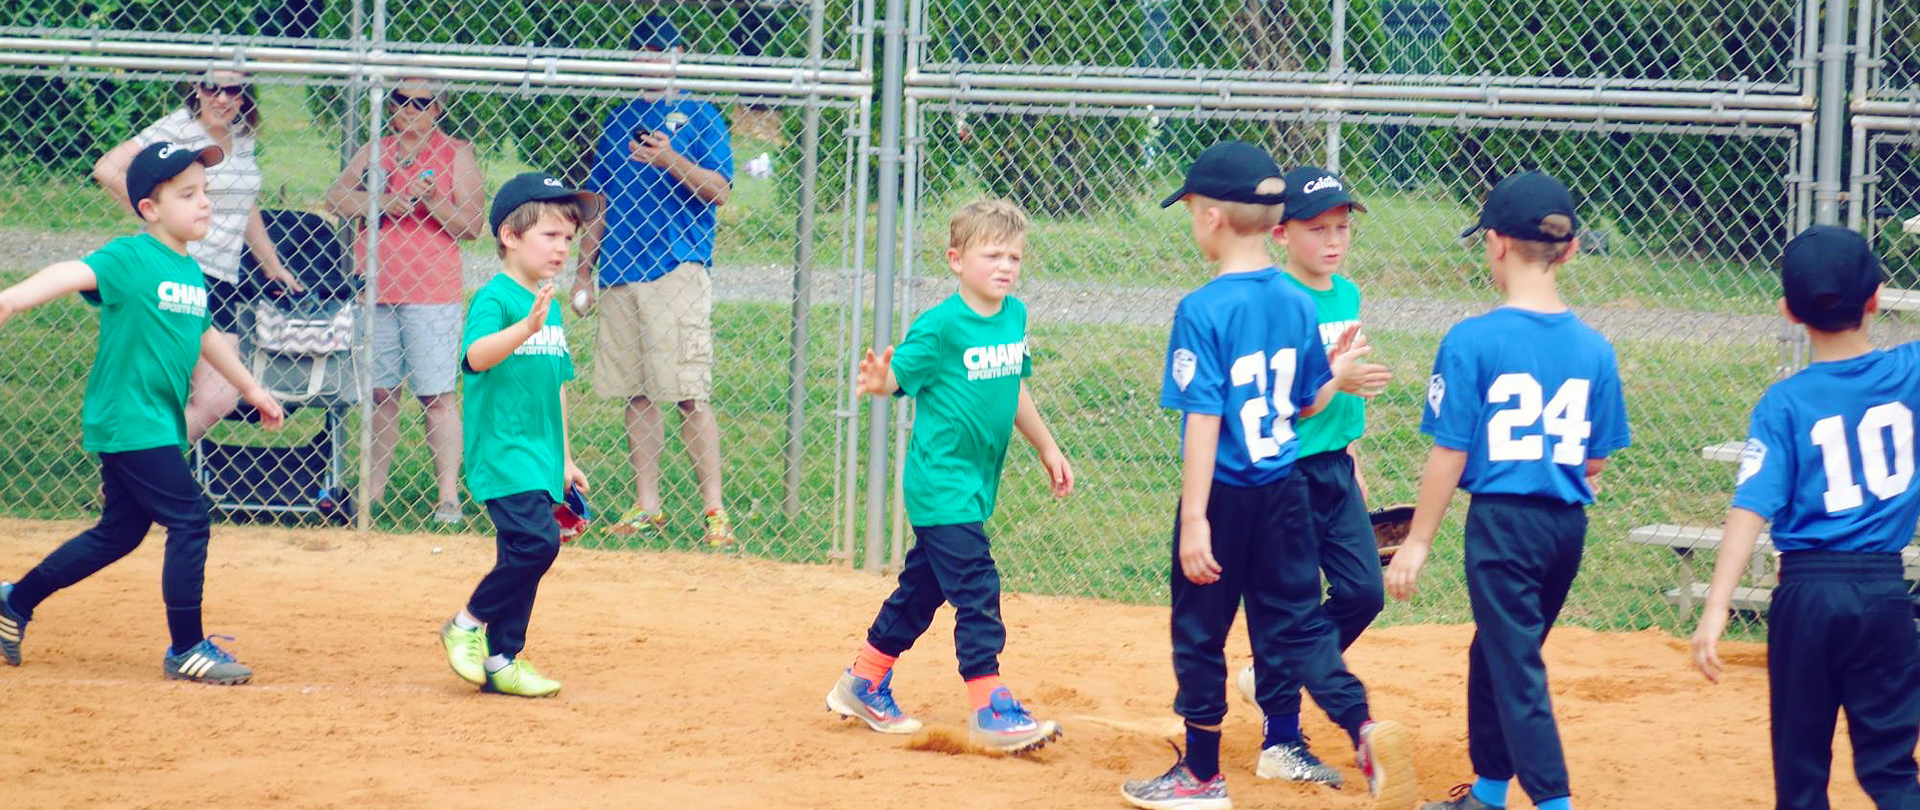 CHAMP T-Ball
Kids ages 5–6
 
